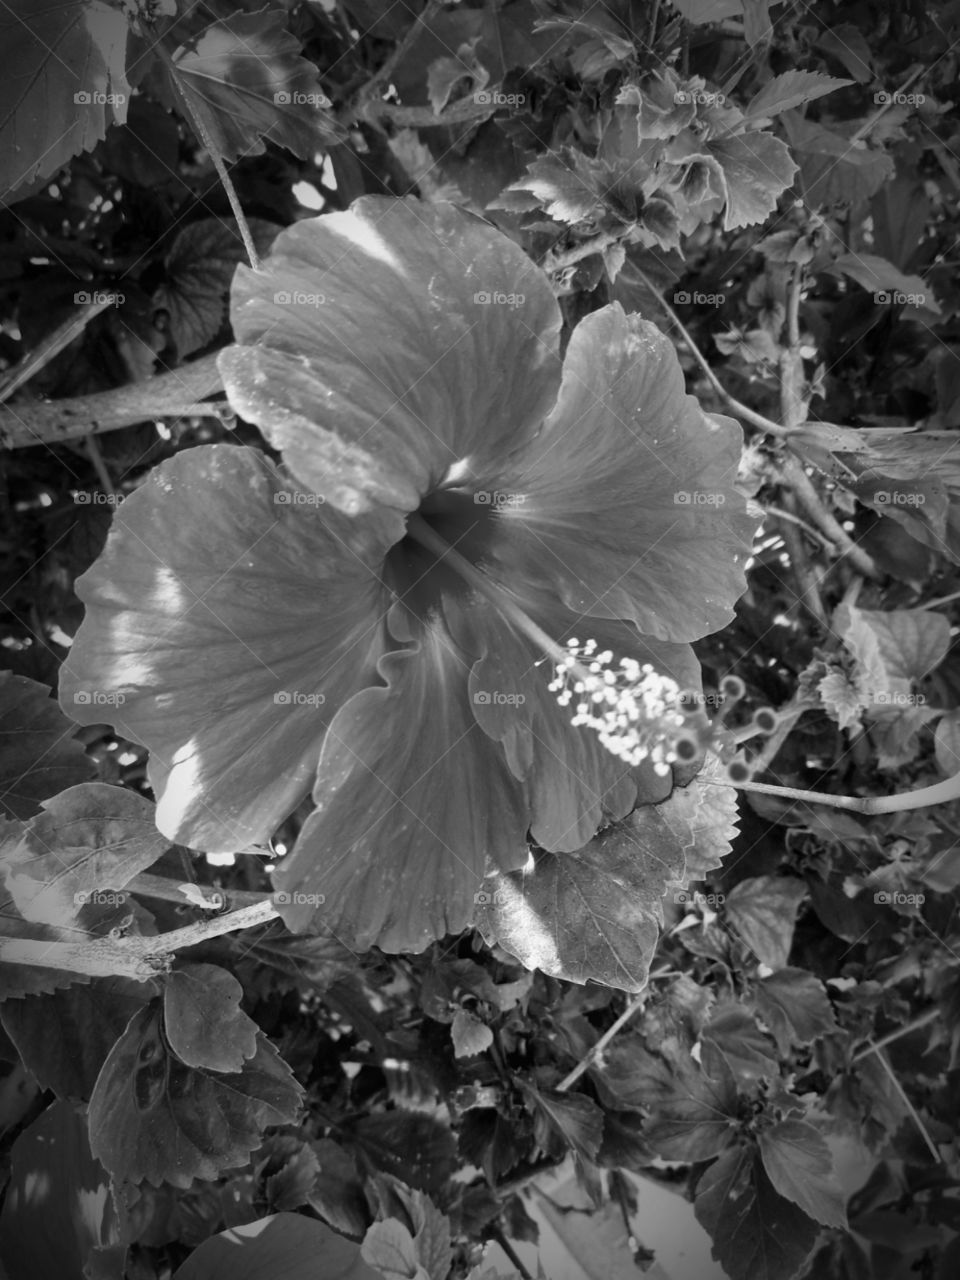 nlack and white picture with flower